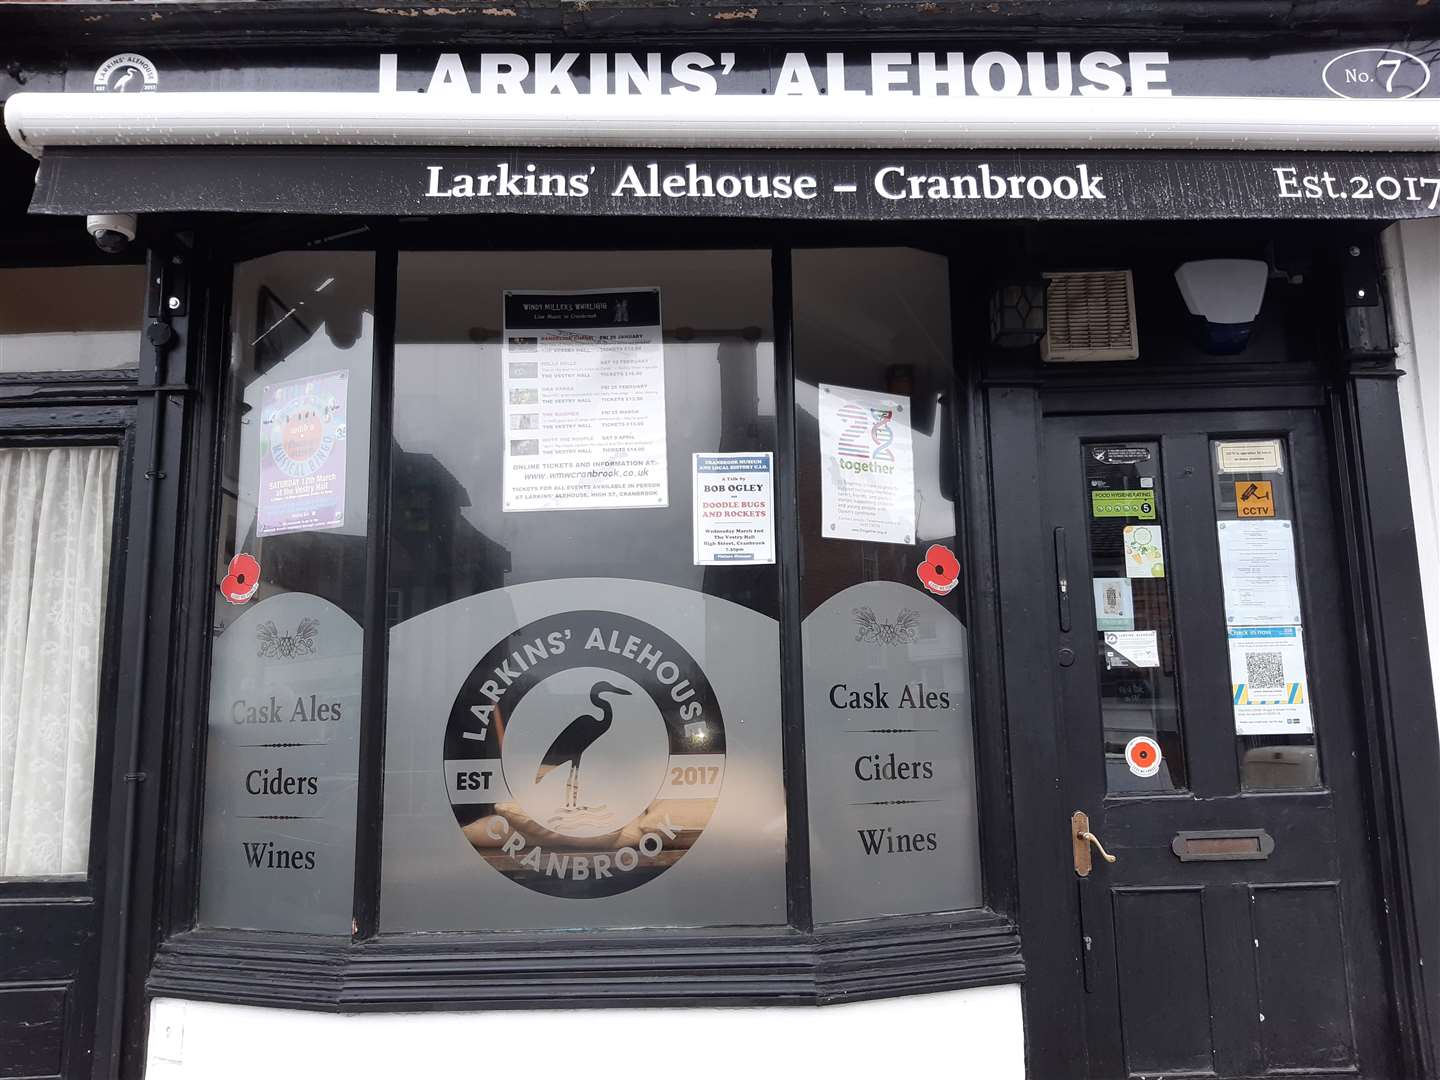 Larkin's Alehouse in Cranbrook has plenty of food and drink optons to keep customers happy.